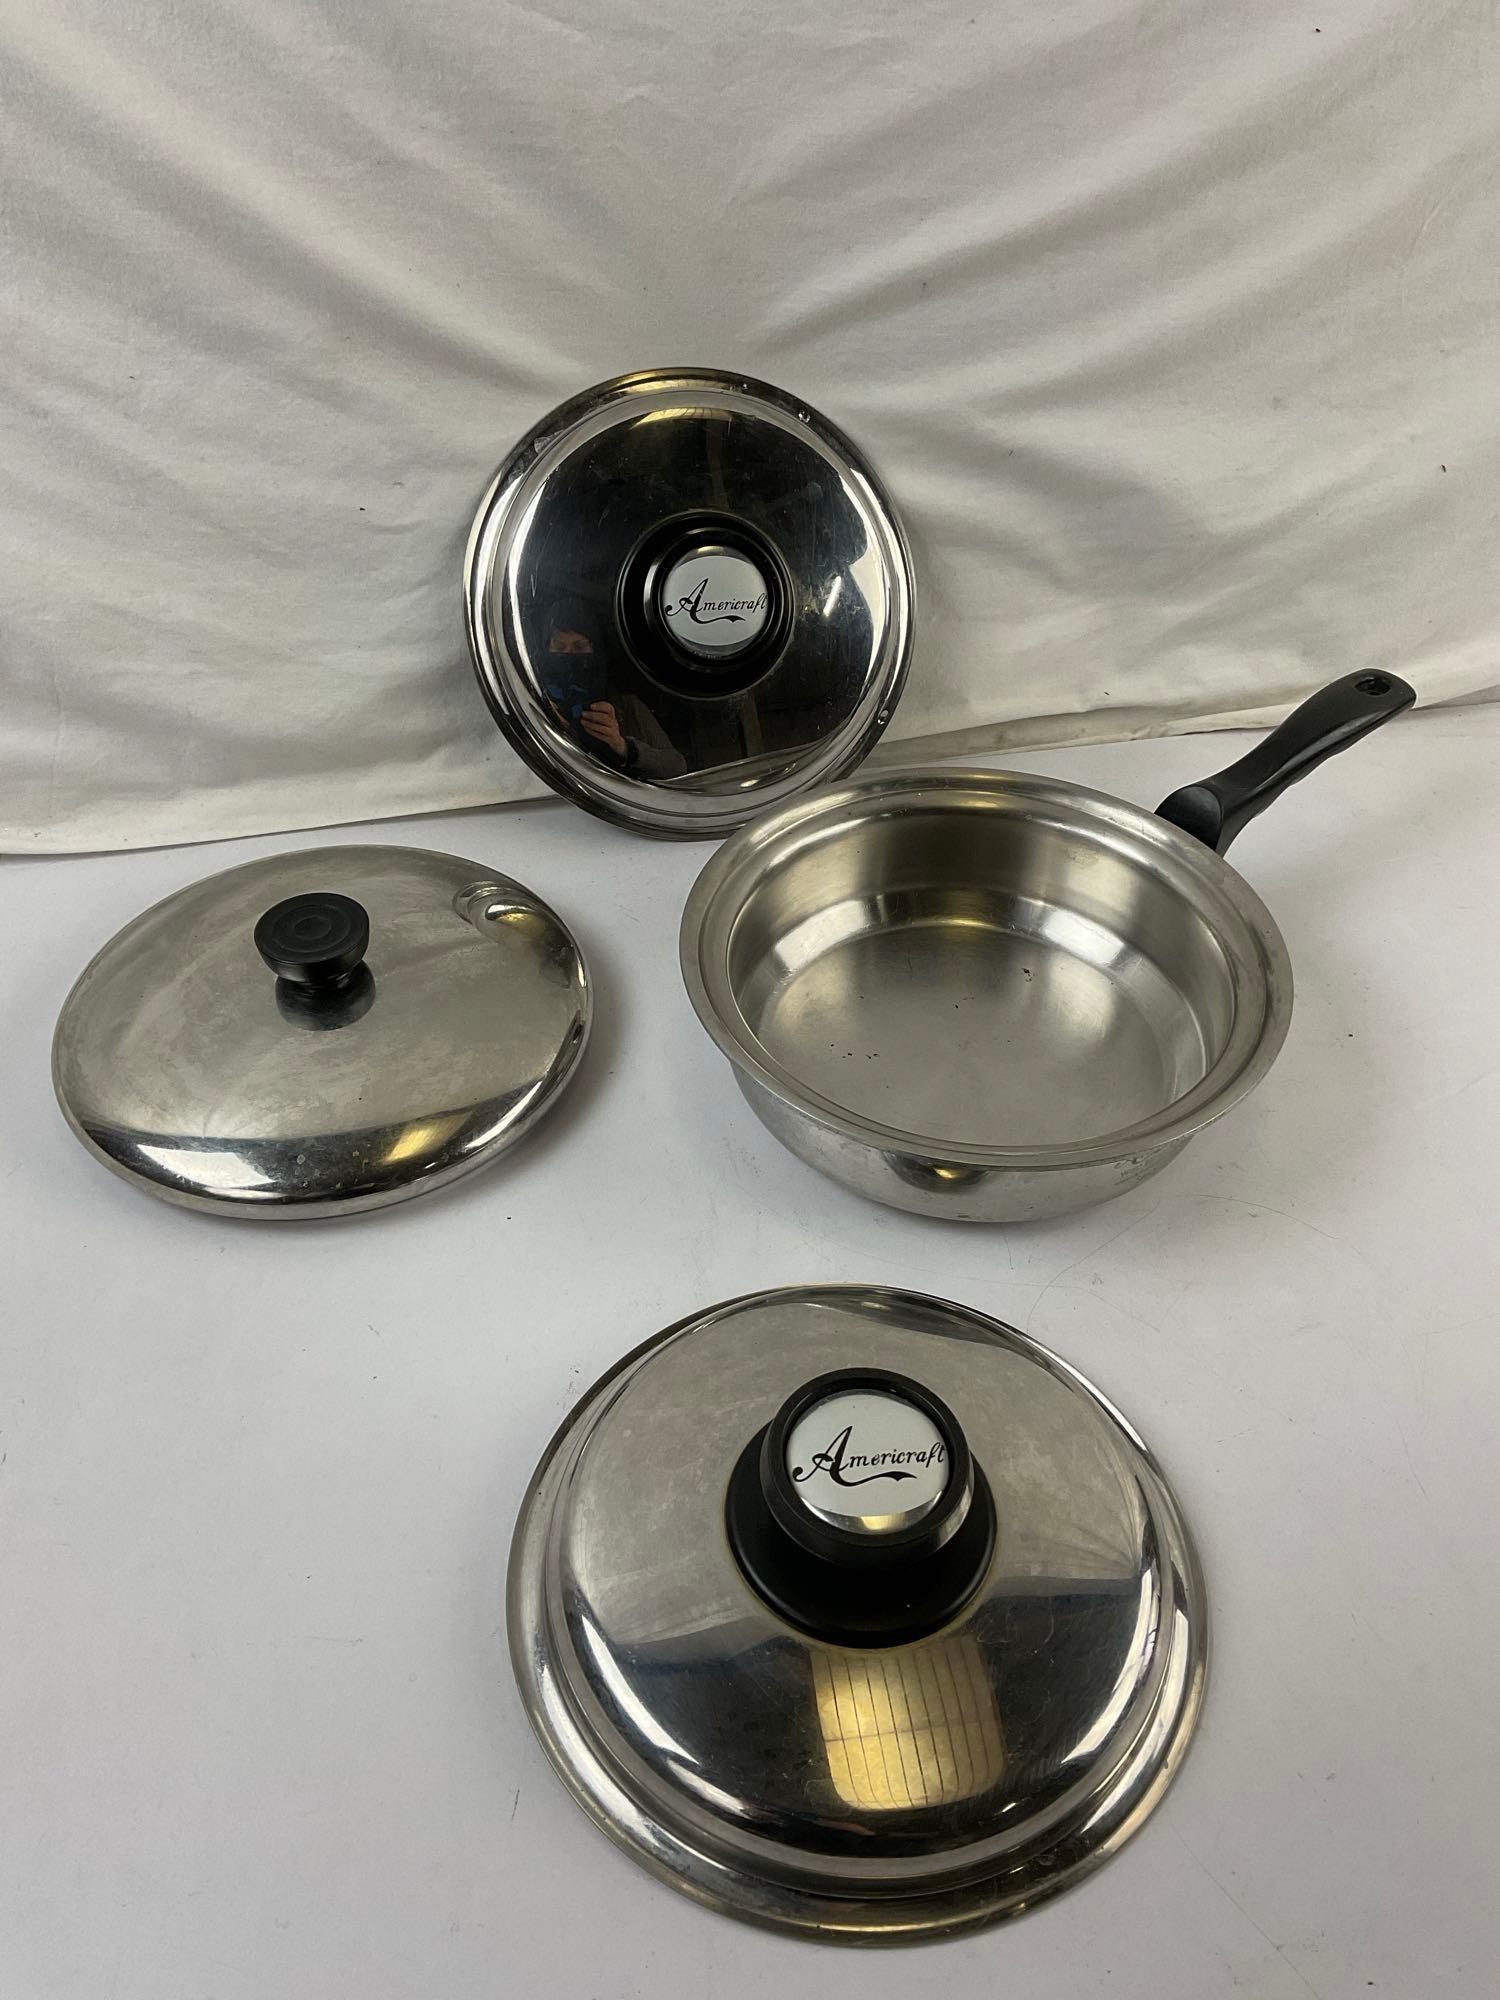 5 pcs Contemporary Cookware & Accessories Assortment. Small Americraft Skillet w/ Lid. See pics.